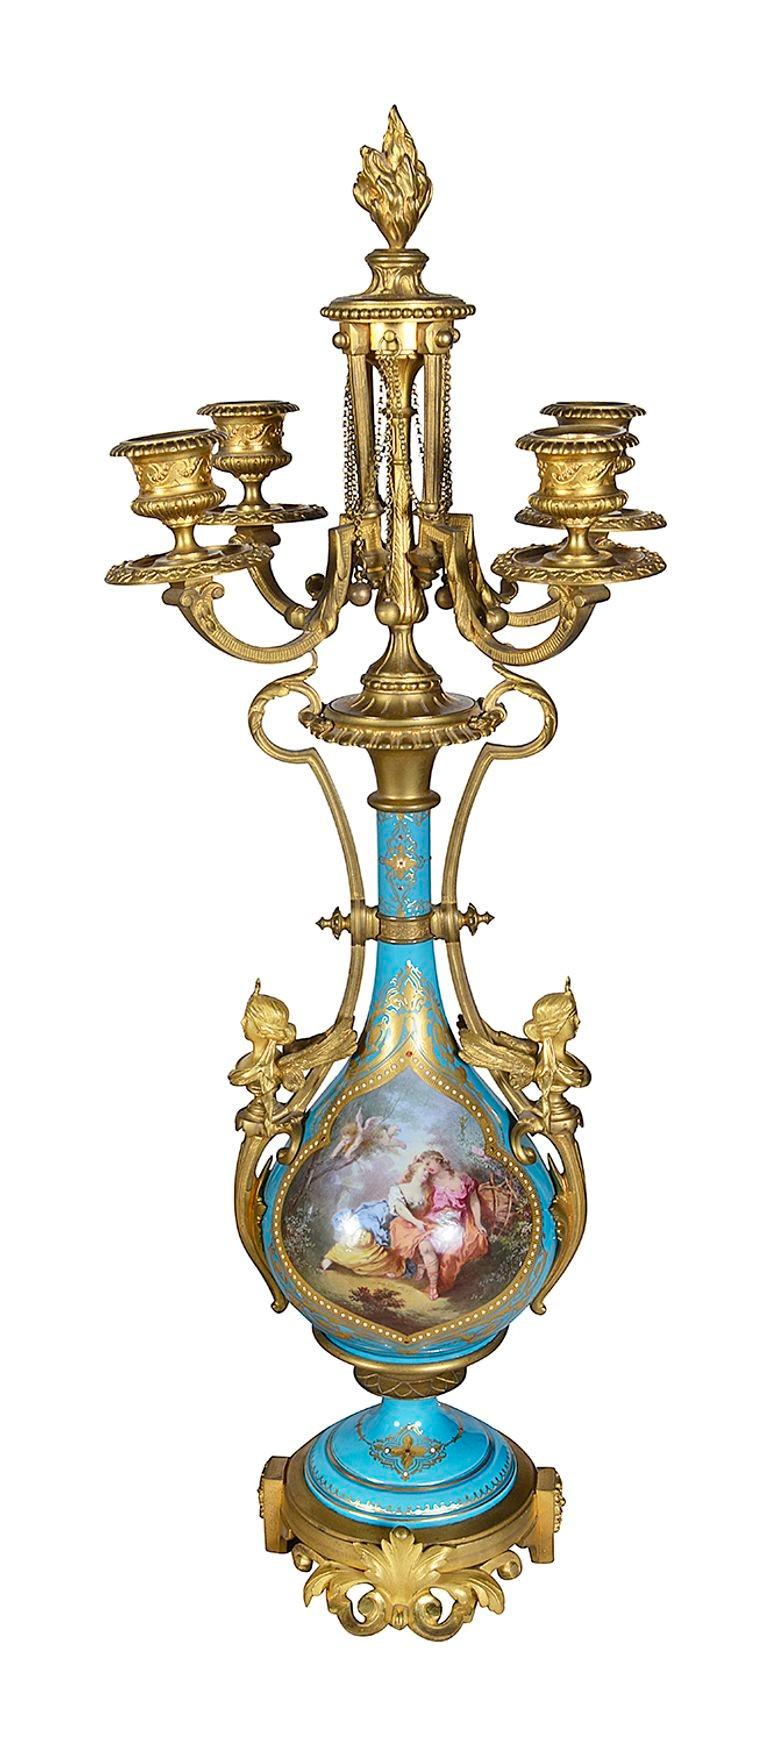 A very good quality French 19th Century Louis XVI Sevres style clock garniture. Having reclining maidens with garlands of flowers supporting an urn above the clock face. Turquoise porcelain with beaded and gilded decoration. Hand painted classical